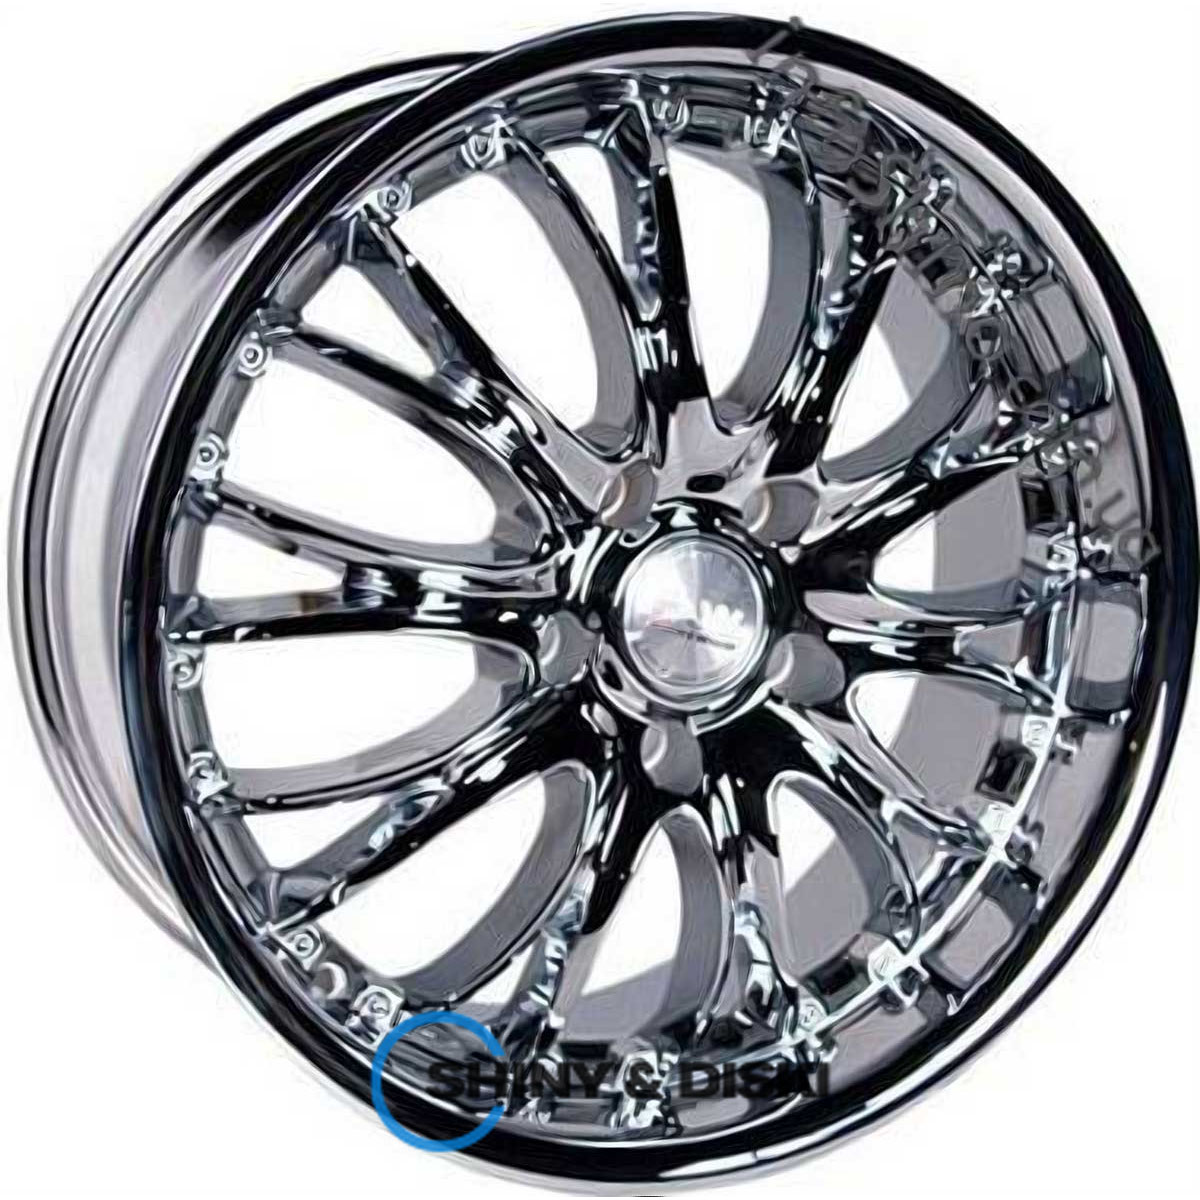 rs tuning h-362 w8 r18 pcd5x120 et45 dia74.1